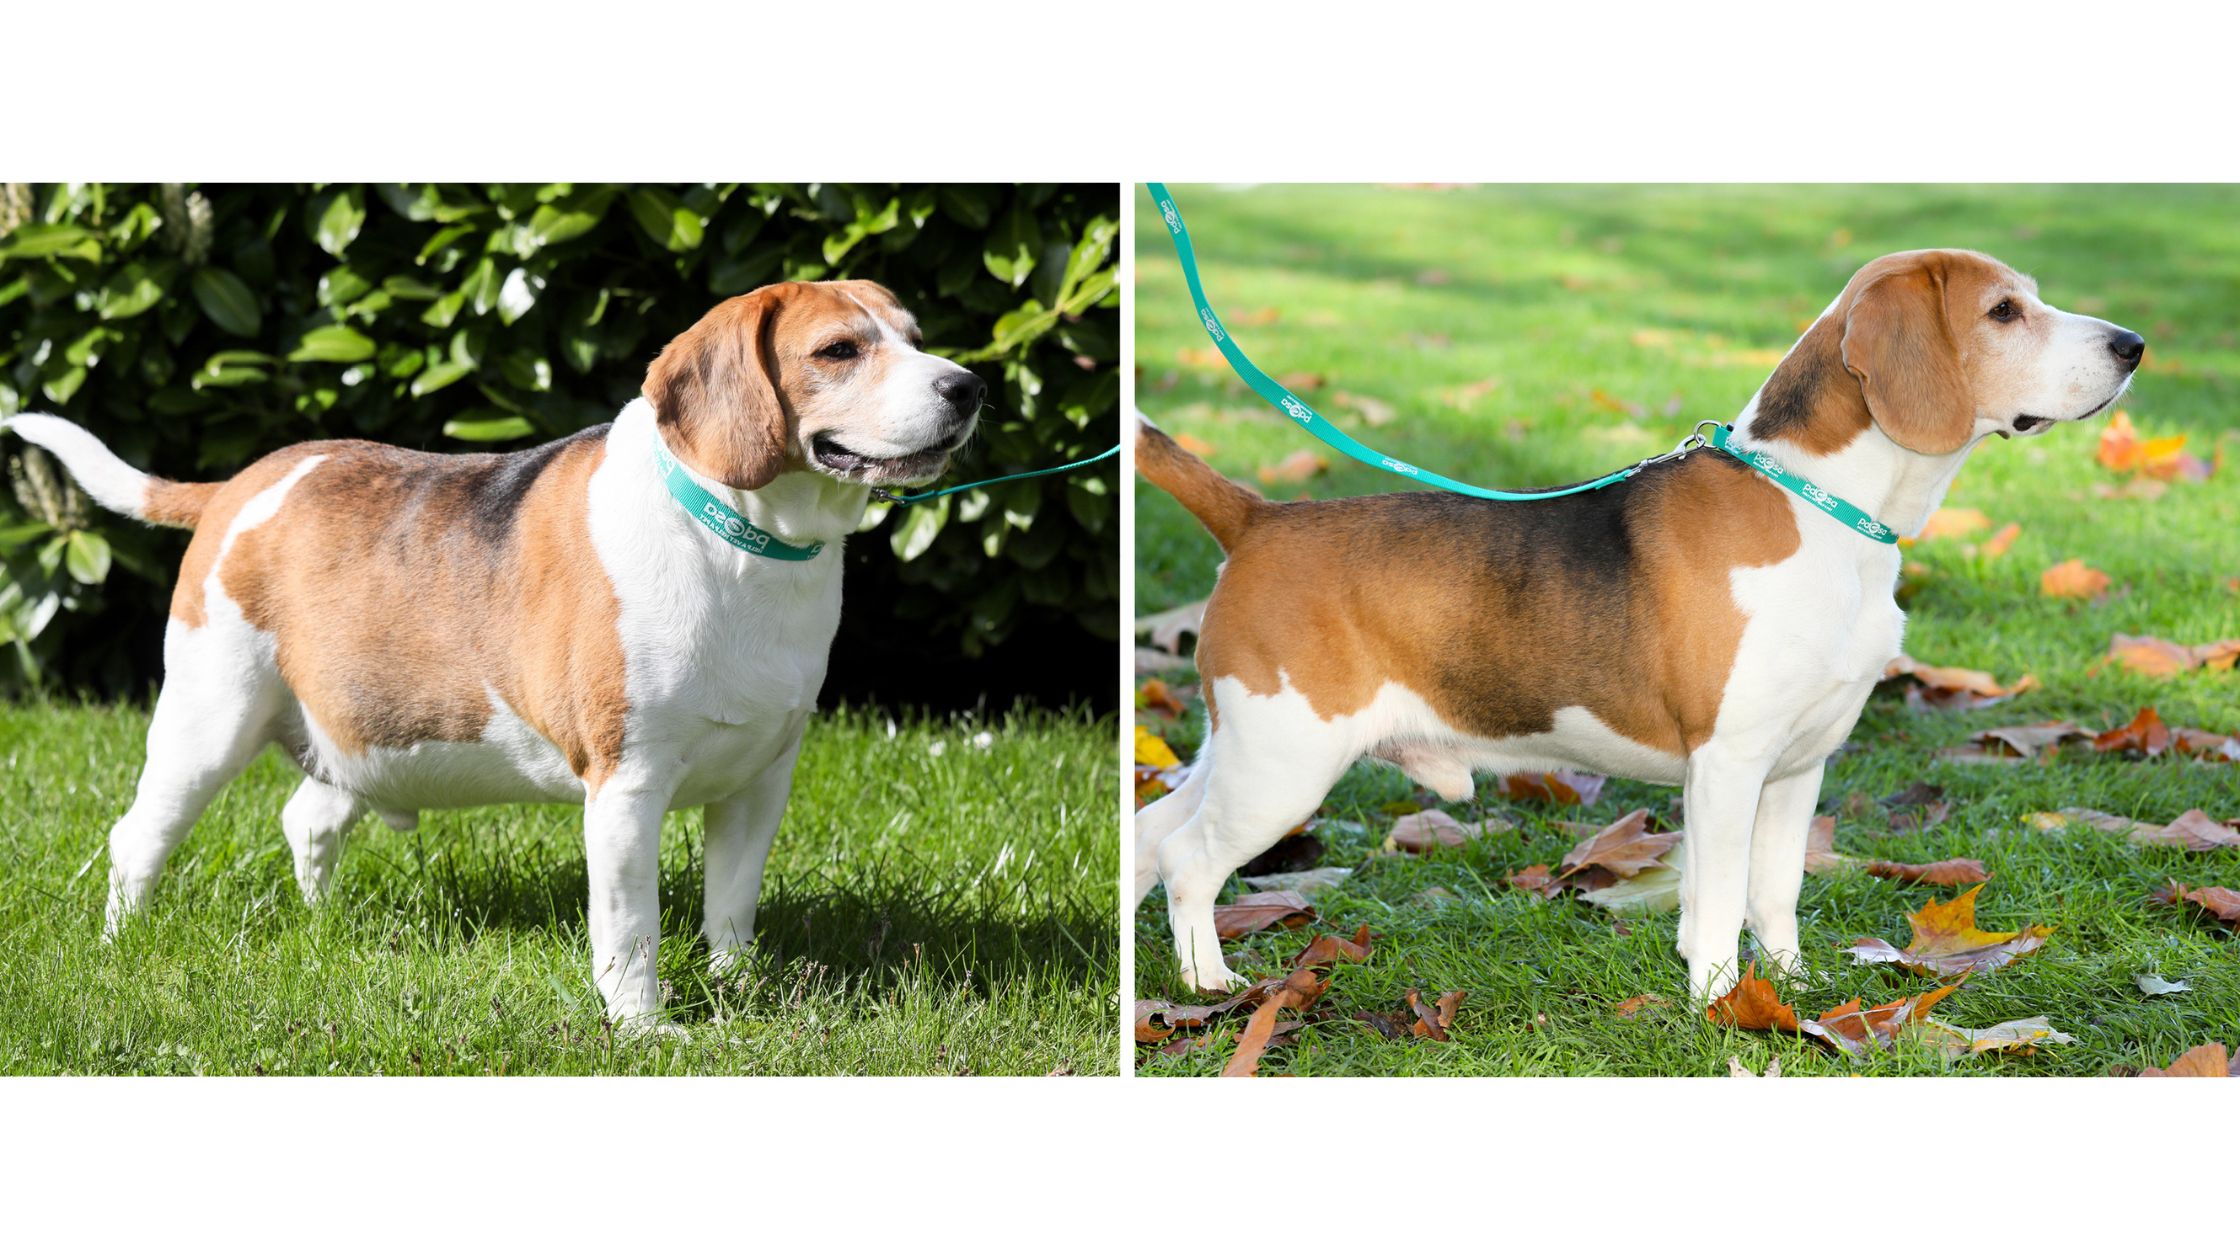 CAUSES AND TACKLING OBESITY IN DOGS